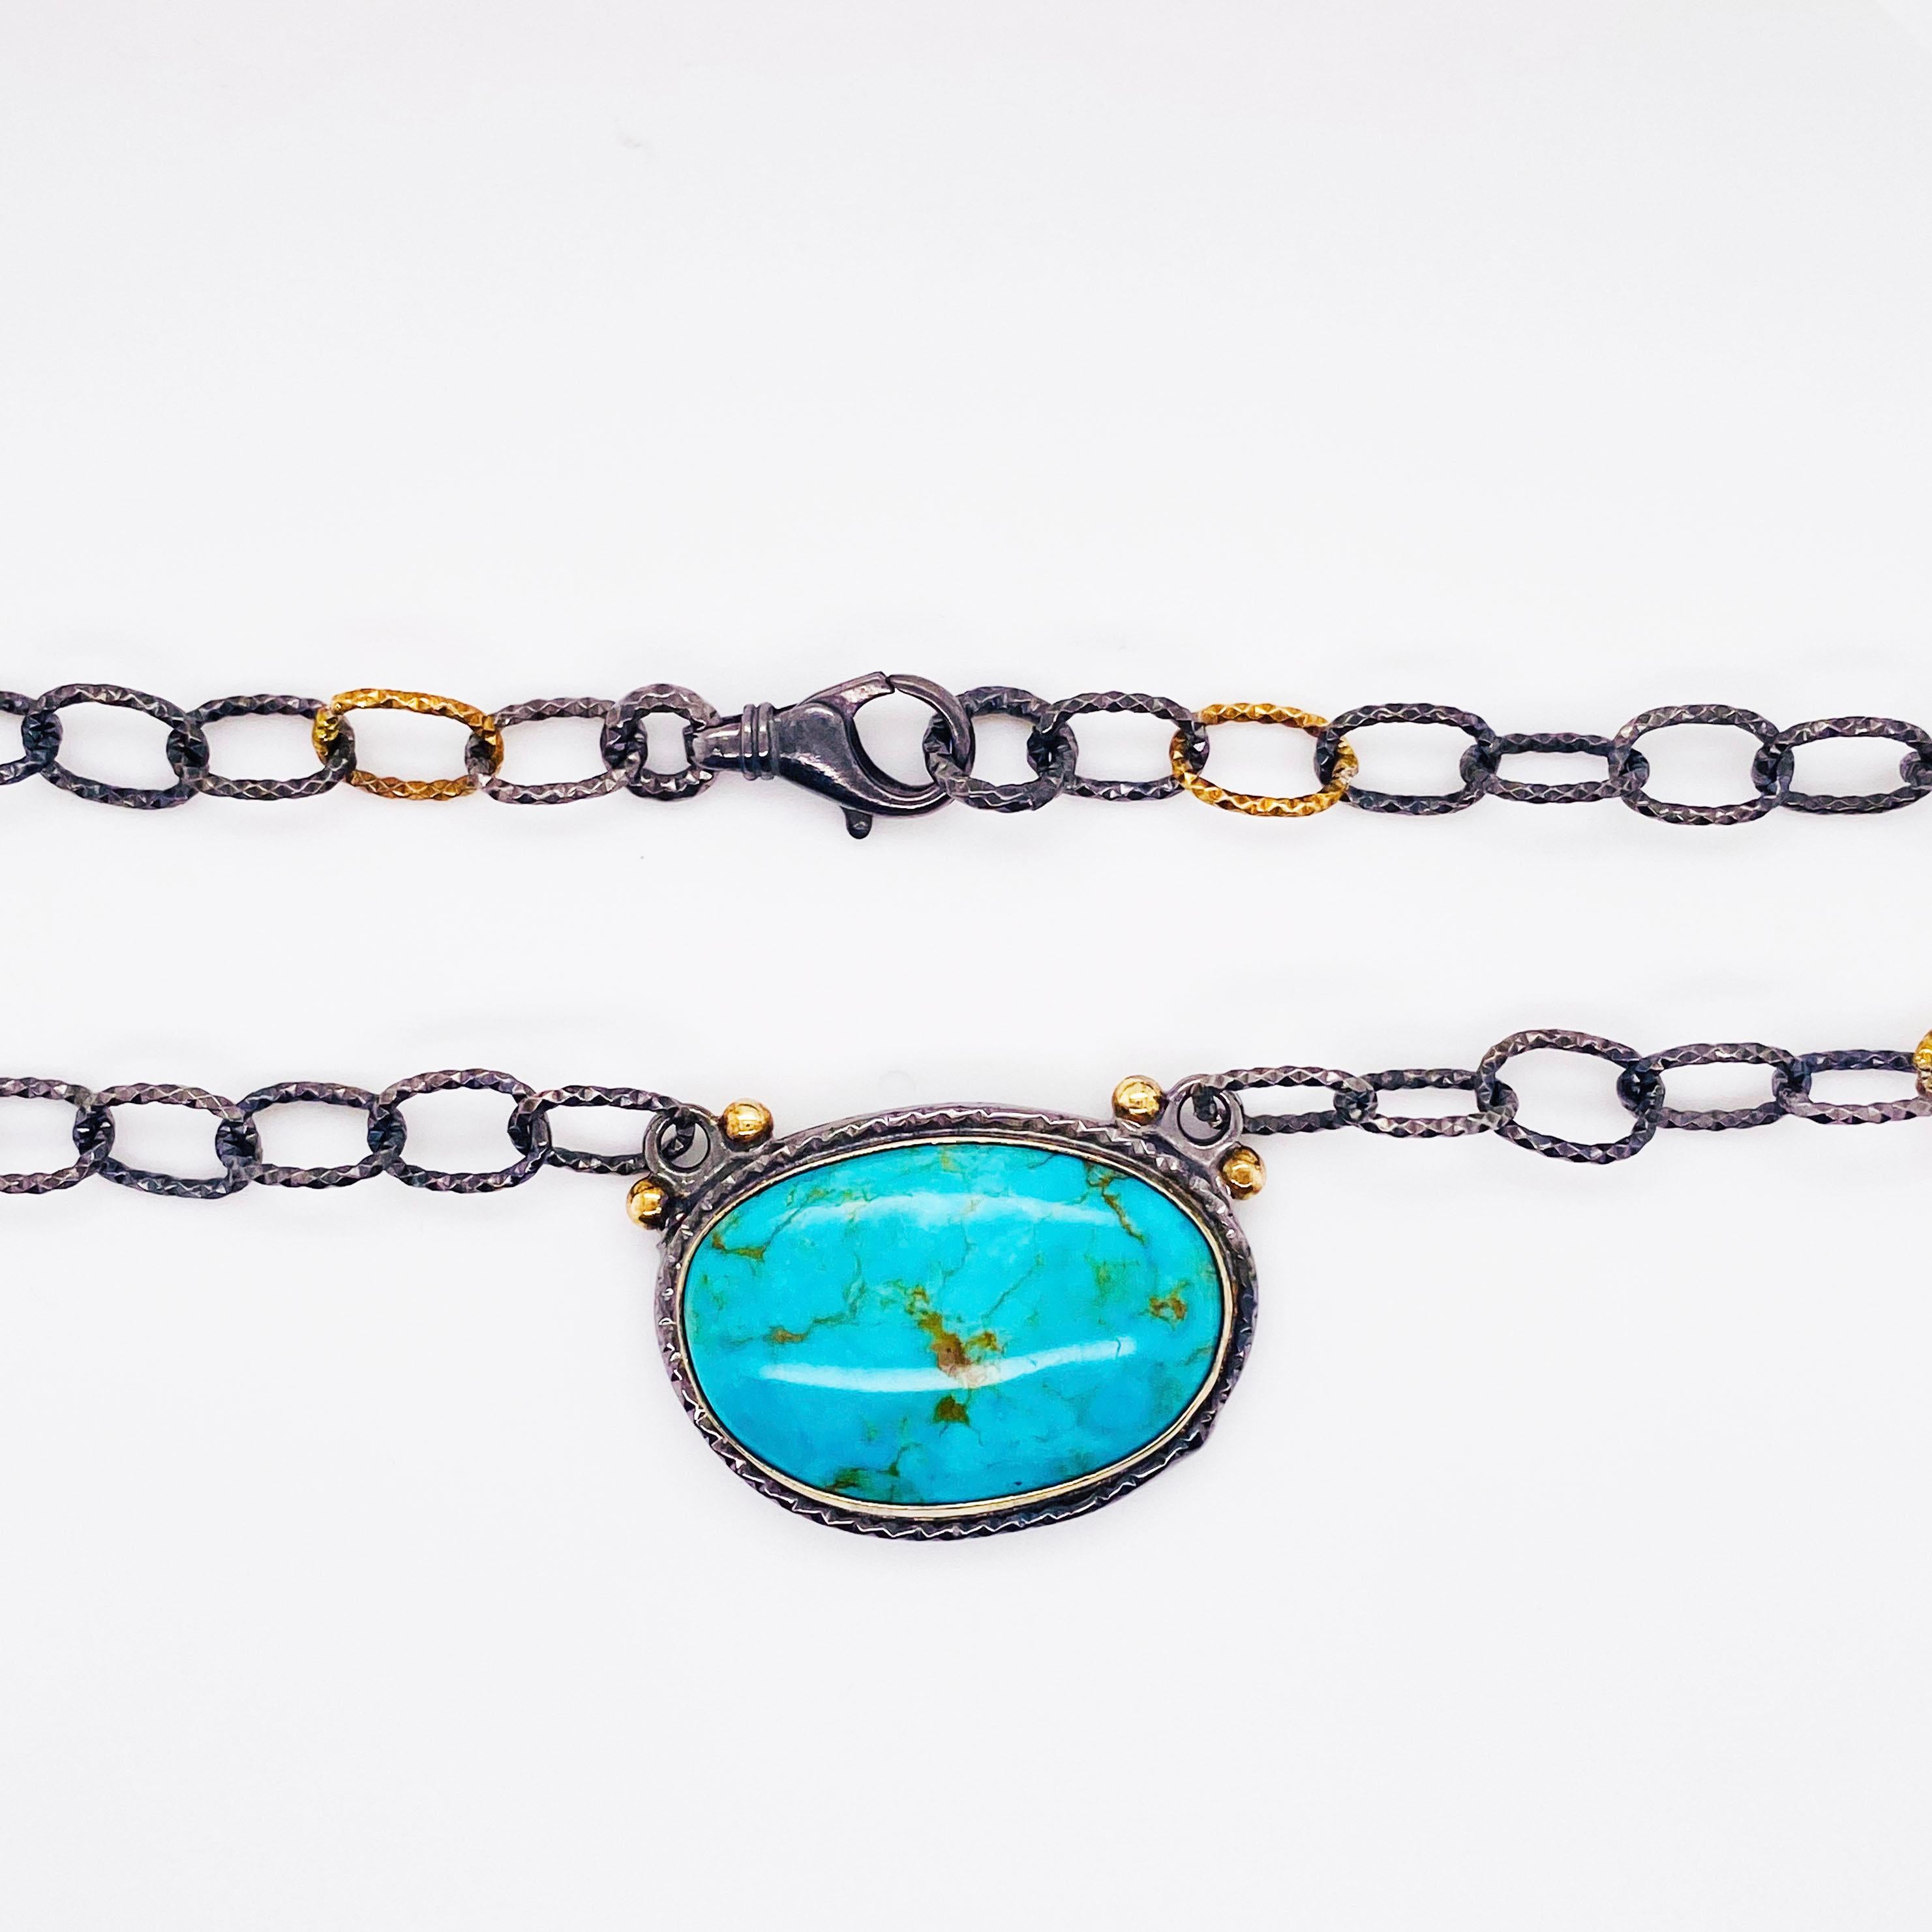 Modern Turquoise Statement Necklace in Sterling Silver Bezel and Handmade Chain